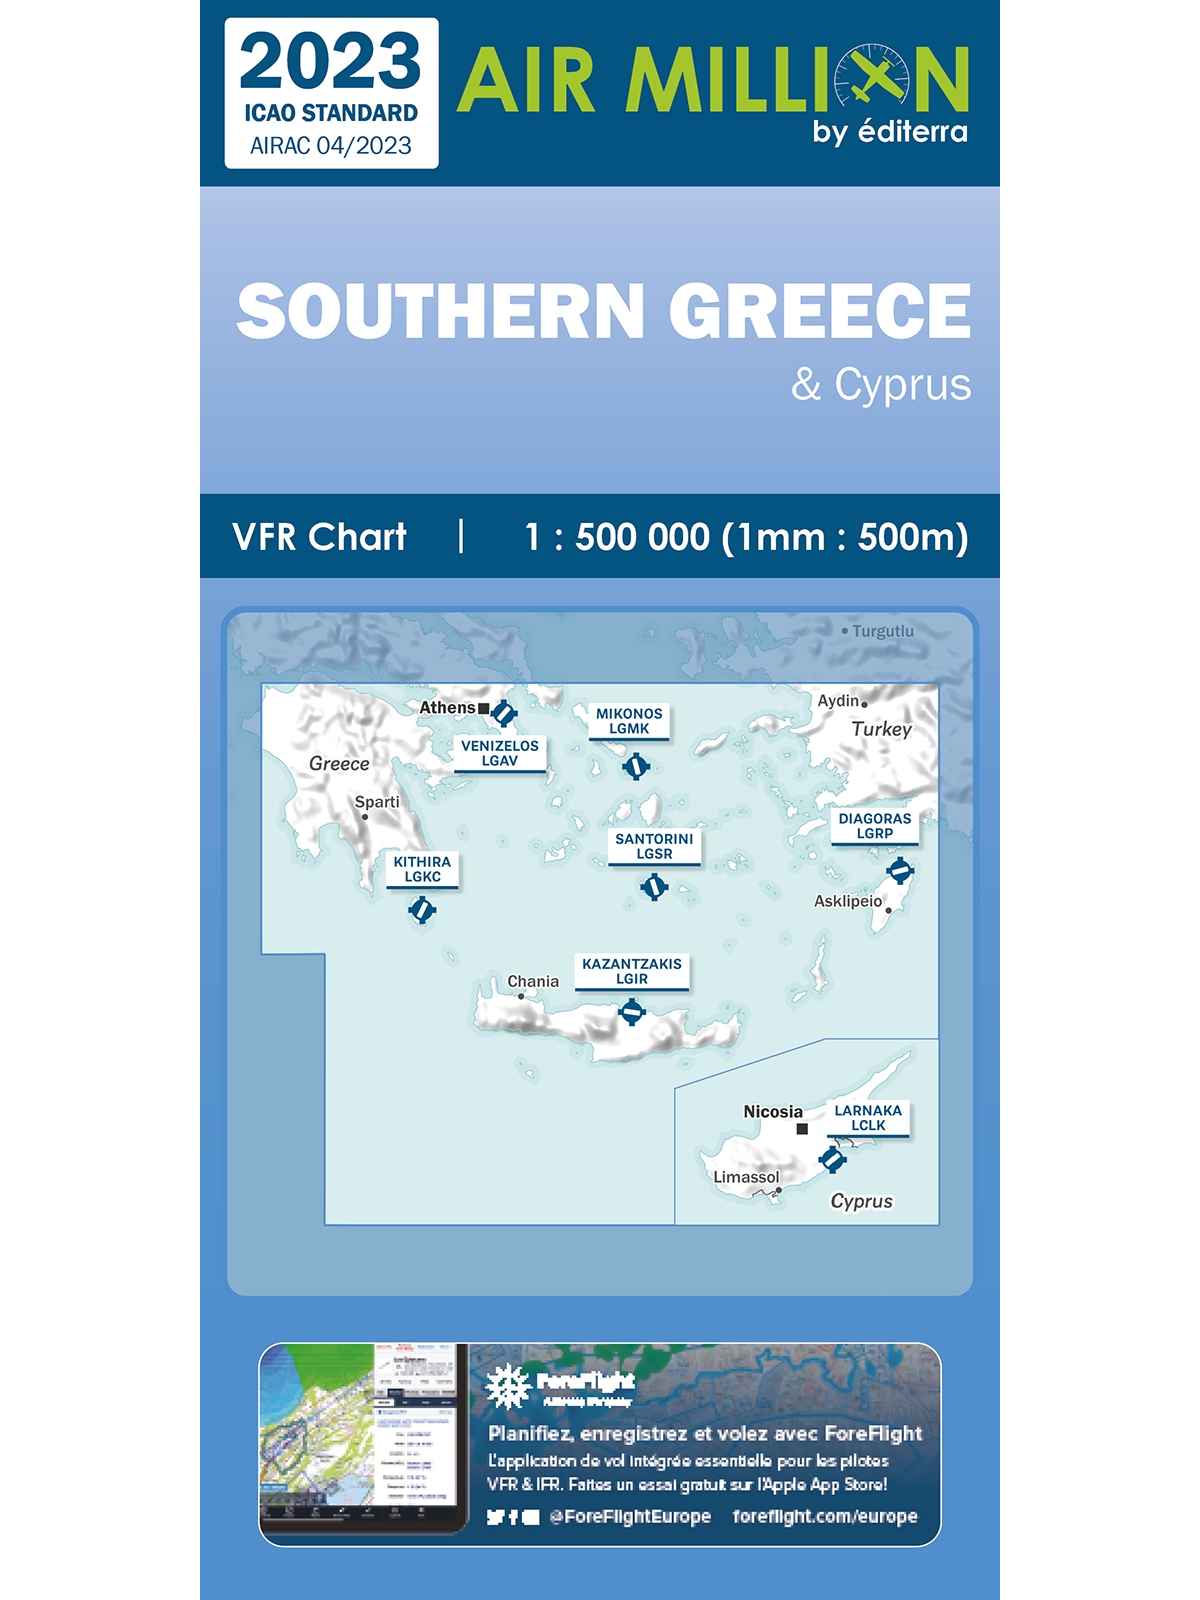 Southern Greece - Air Million Zoom VFR Chart 1:500.000, folded, 2023